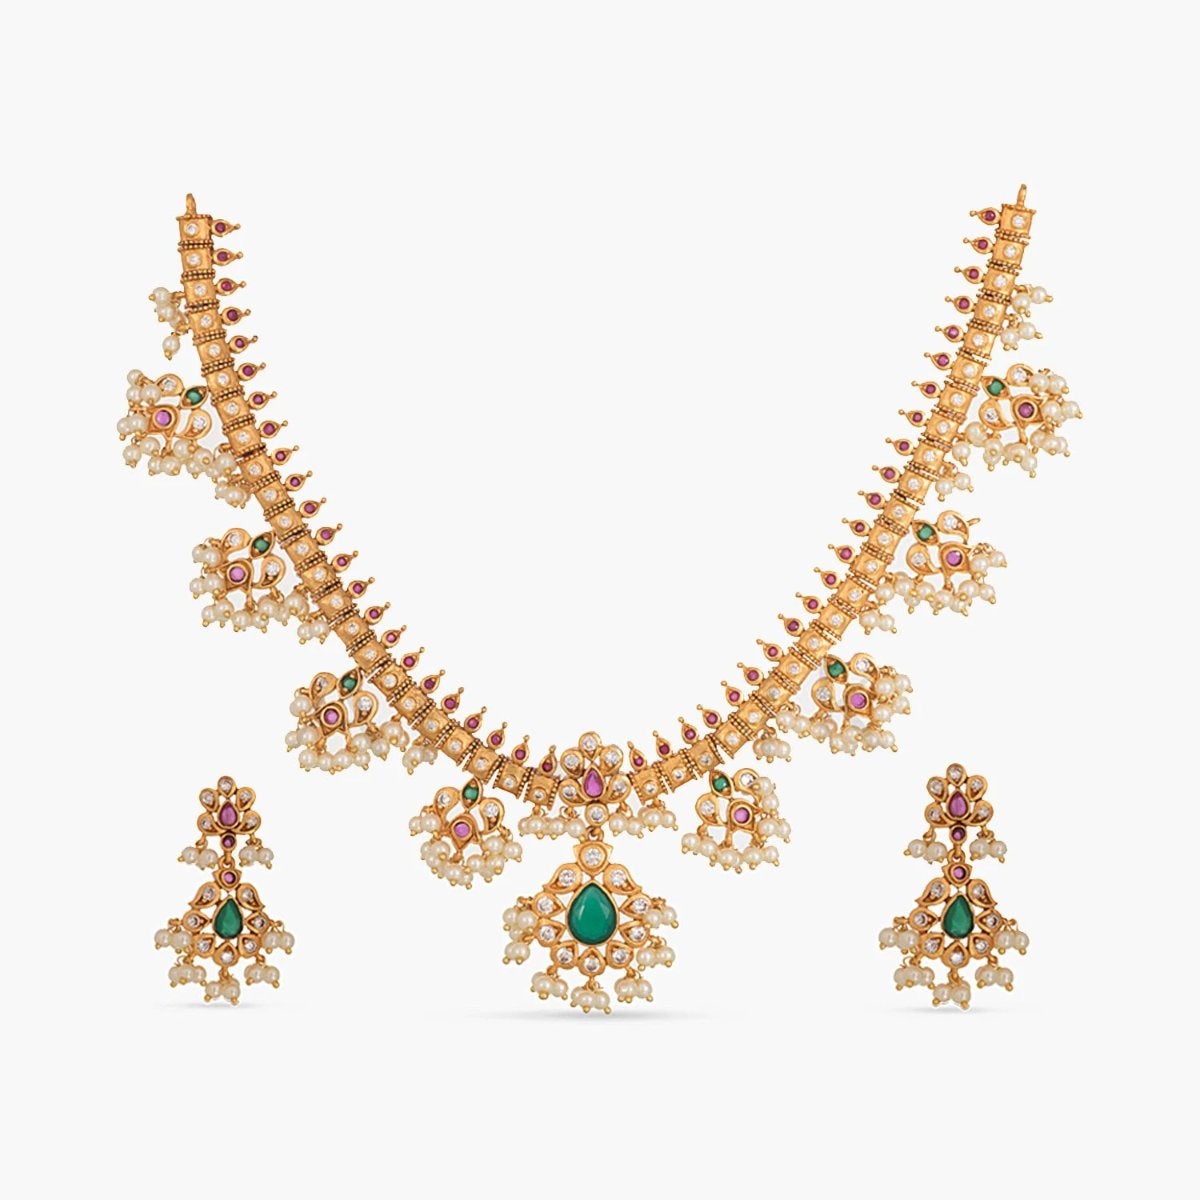 Indian Gold Necklace - Get Best Price from Manufacturers & Suppliers in  India